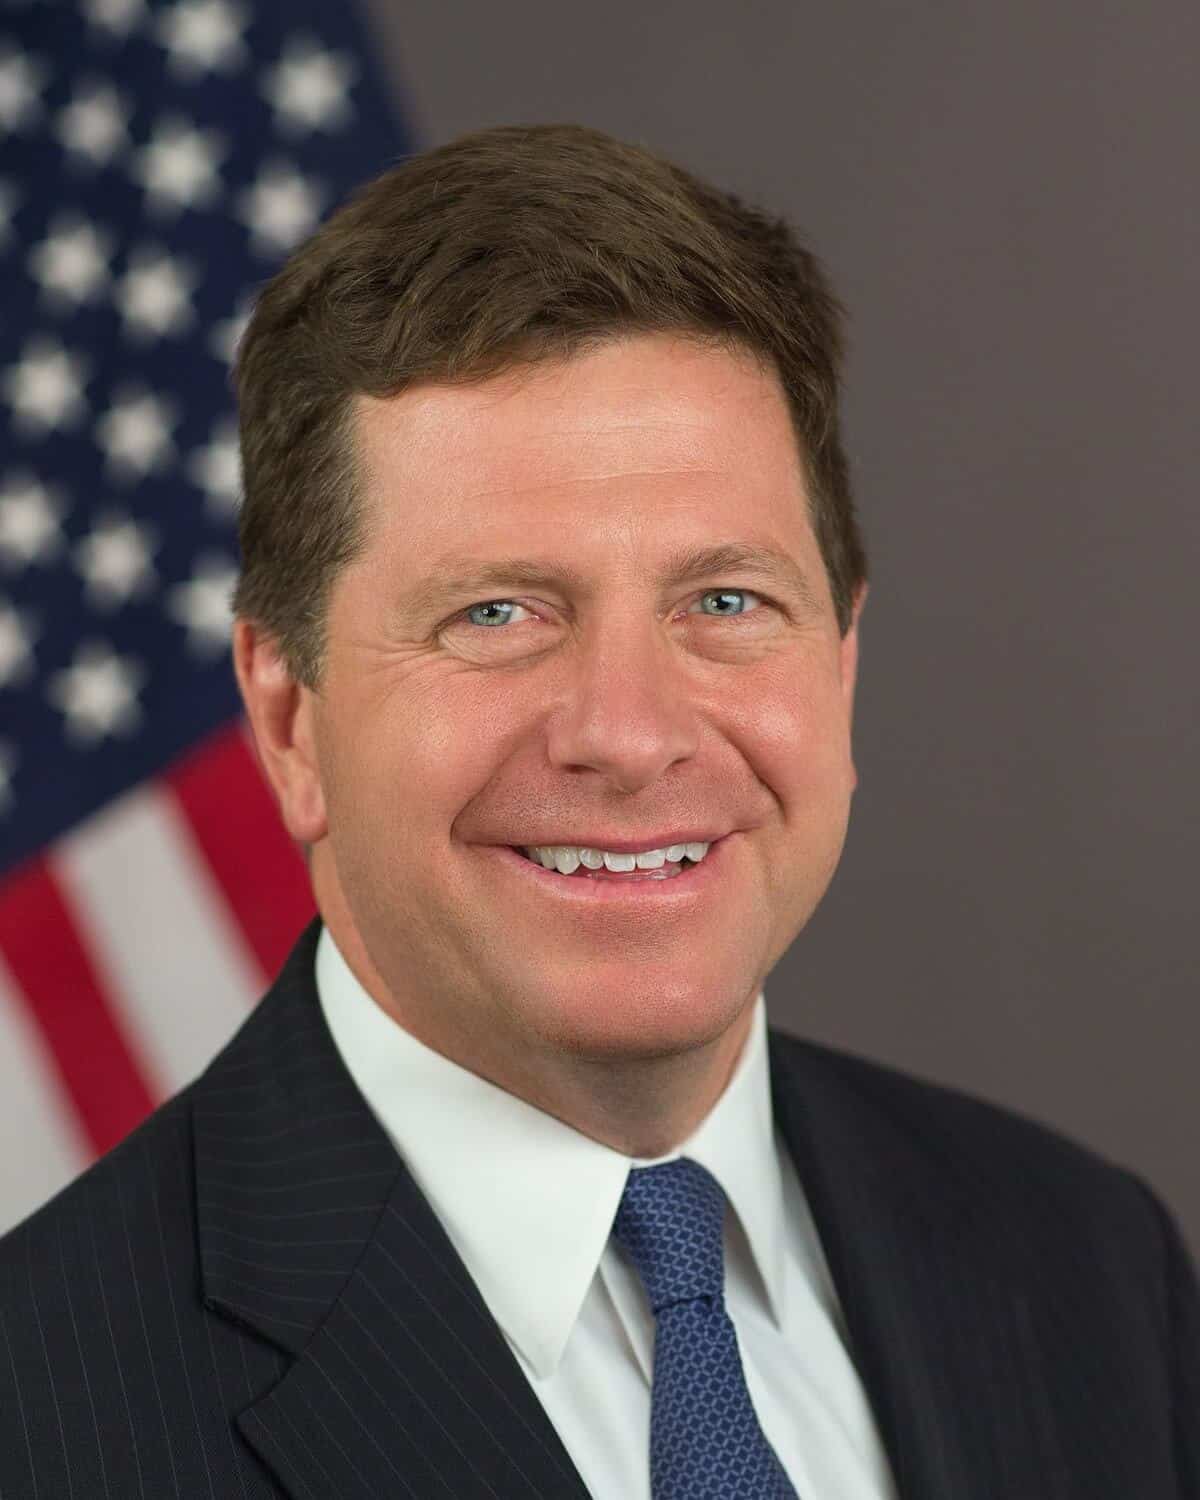 BlackRock getting behind a bitcoin ETF is an ''incredible development,'' says former SEC Chair Jay Clayton.